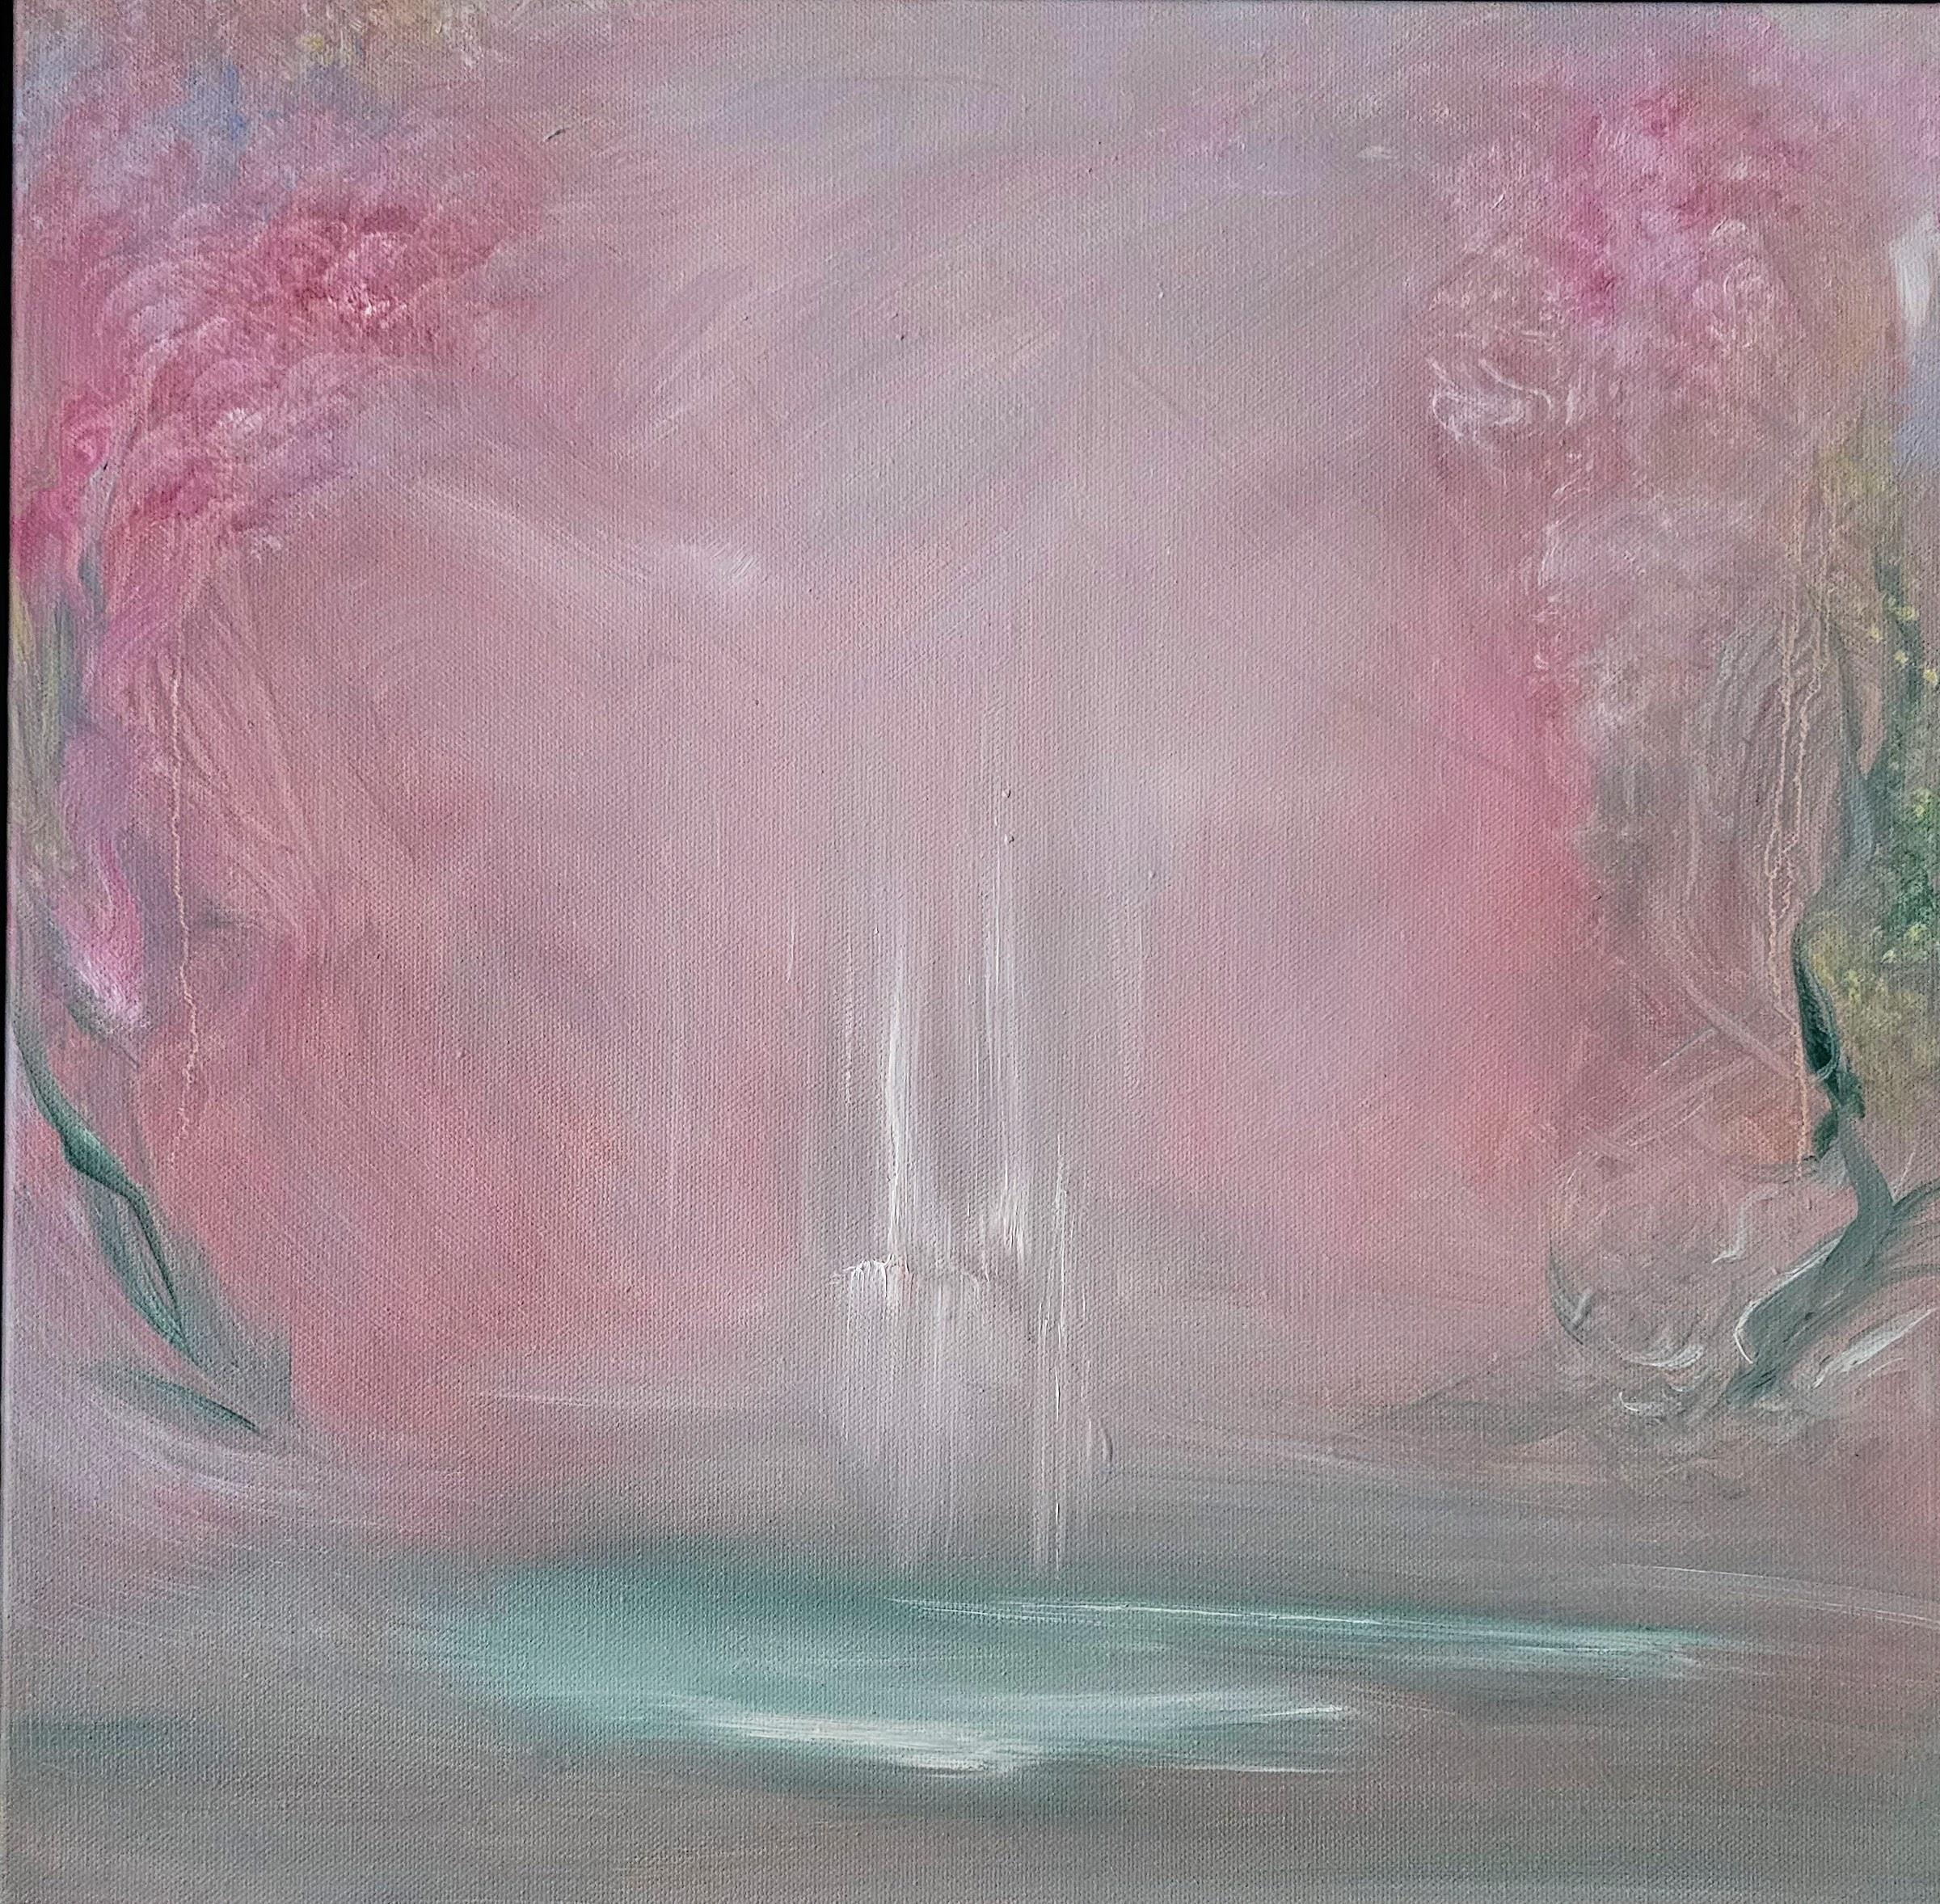 Water baby - Framed pink abstract floral nature painting